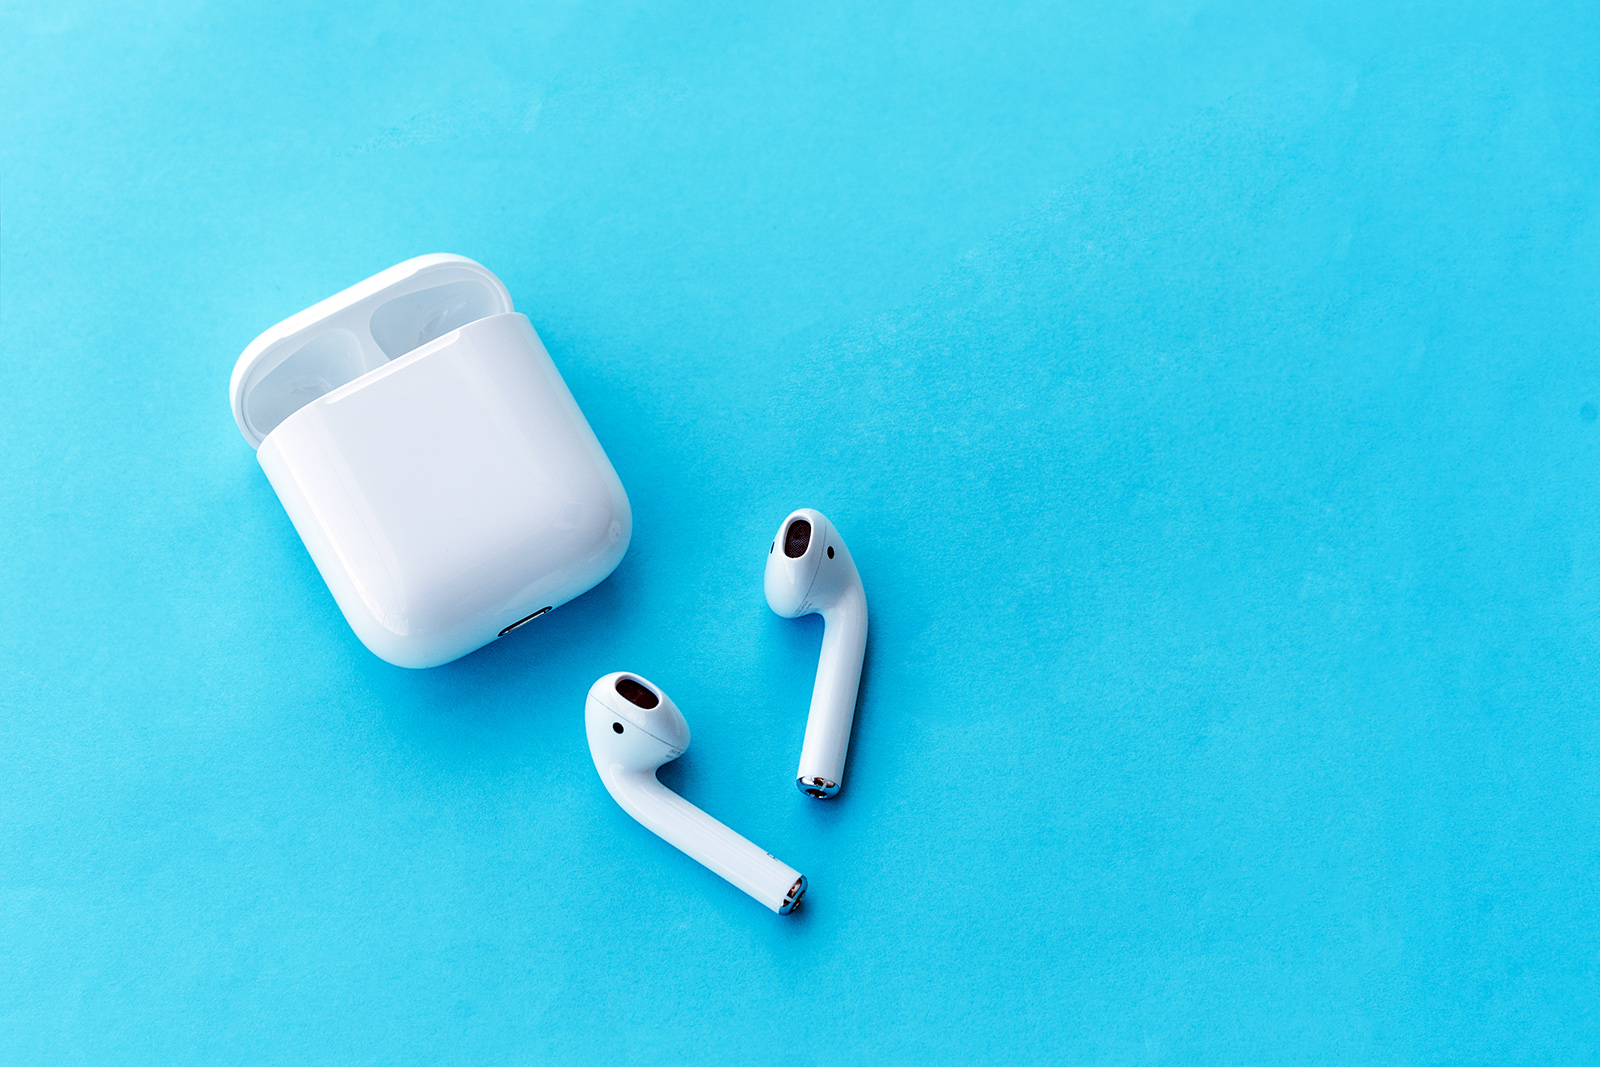 It’s still Black Friday at Amazon if you’re shopping for AirPods 2 or